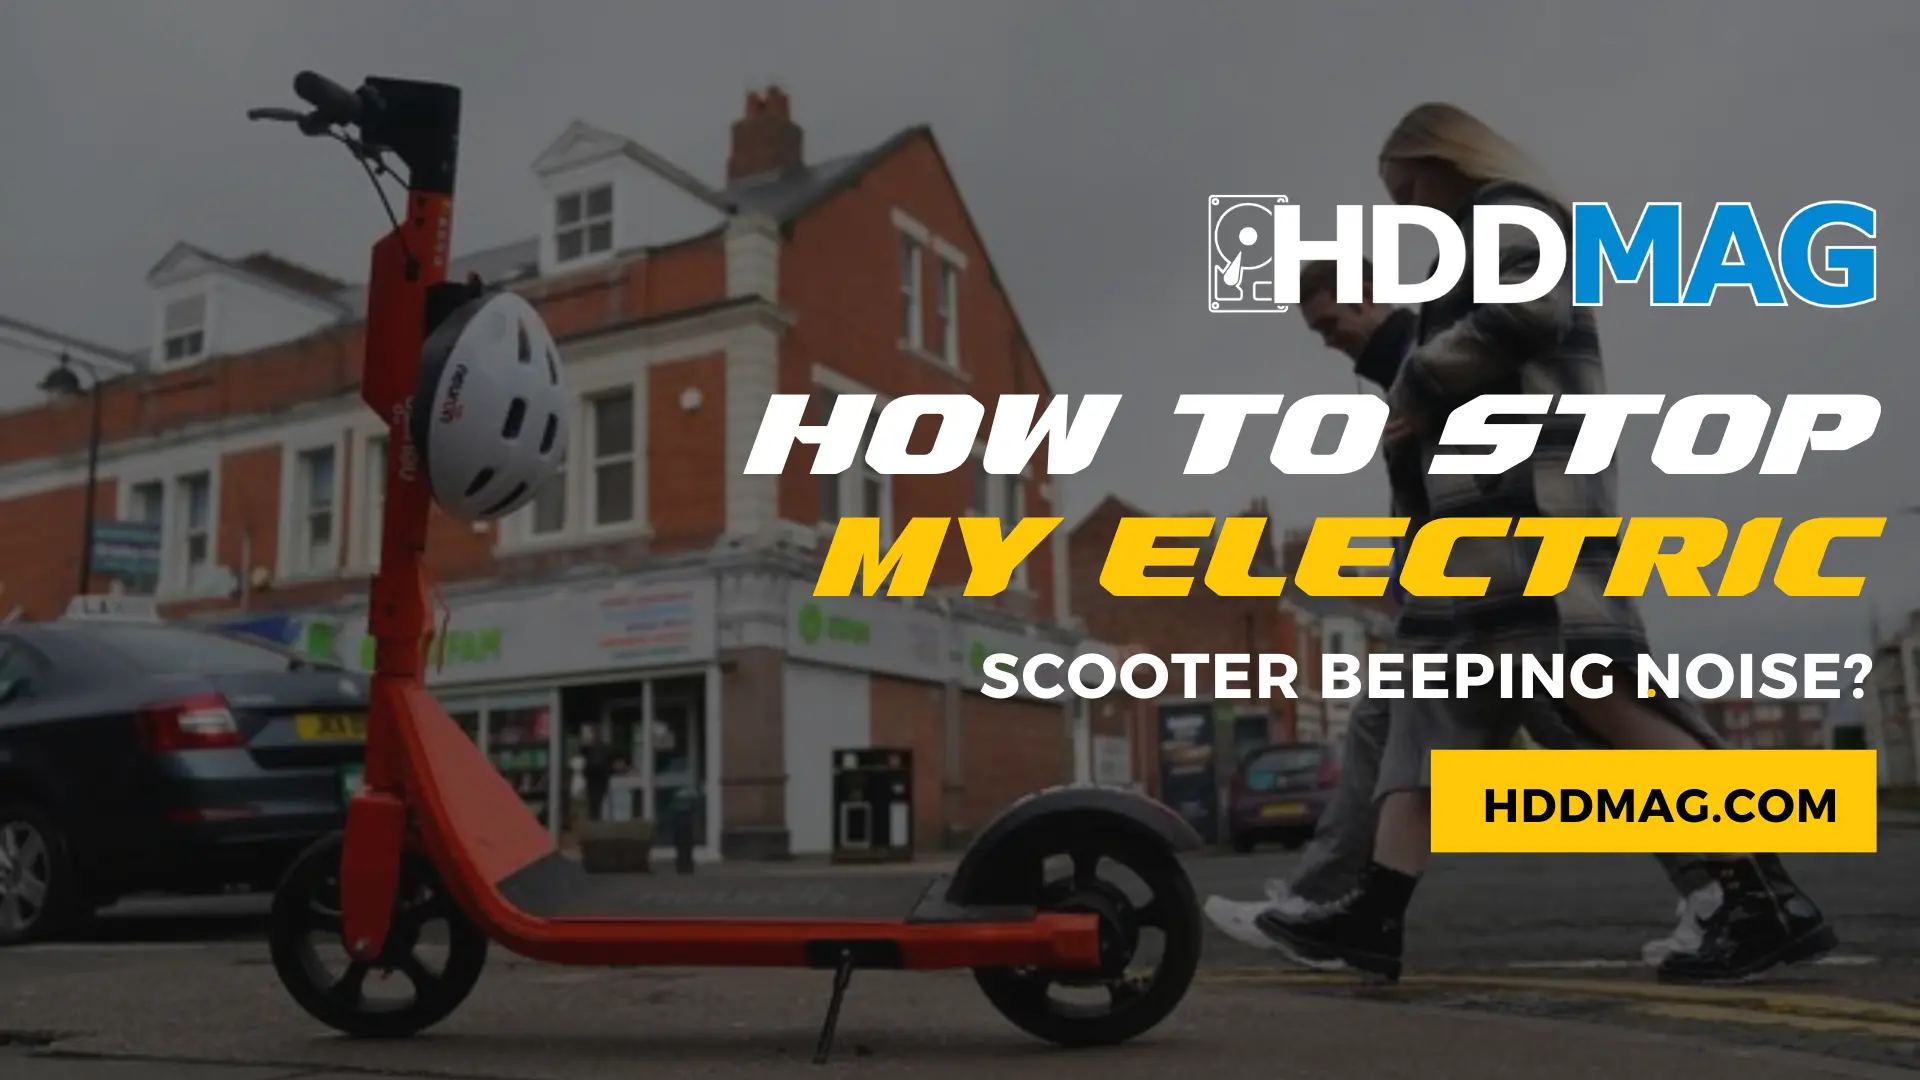 How To Stop My Electric Scooter Beeping Noise